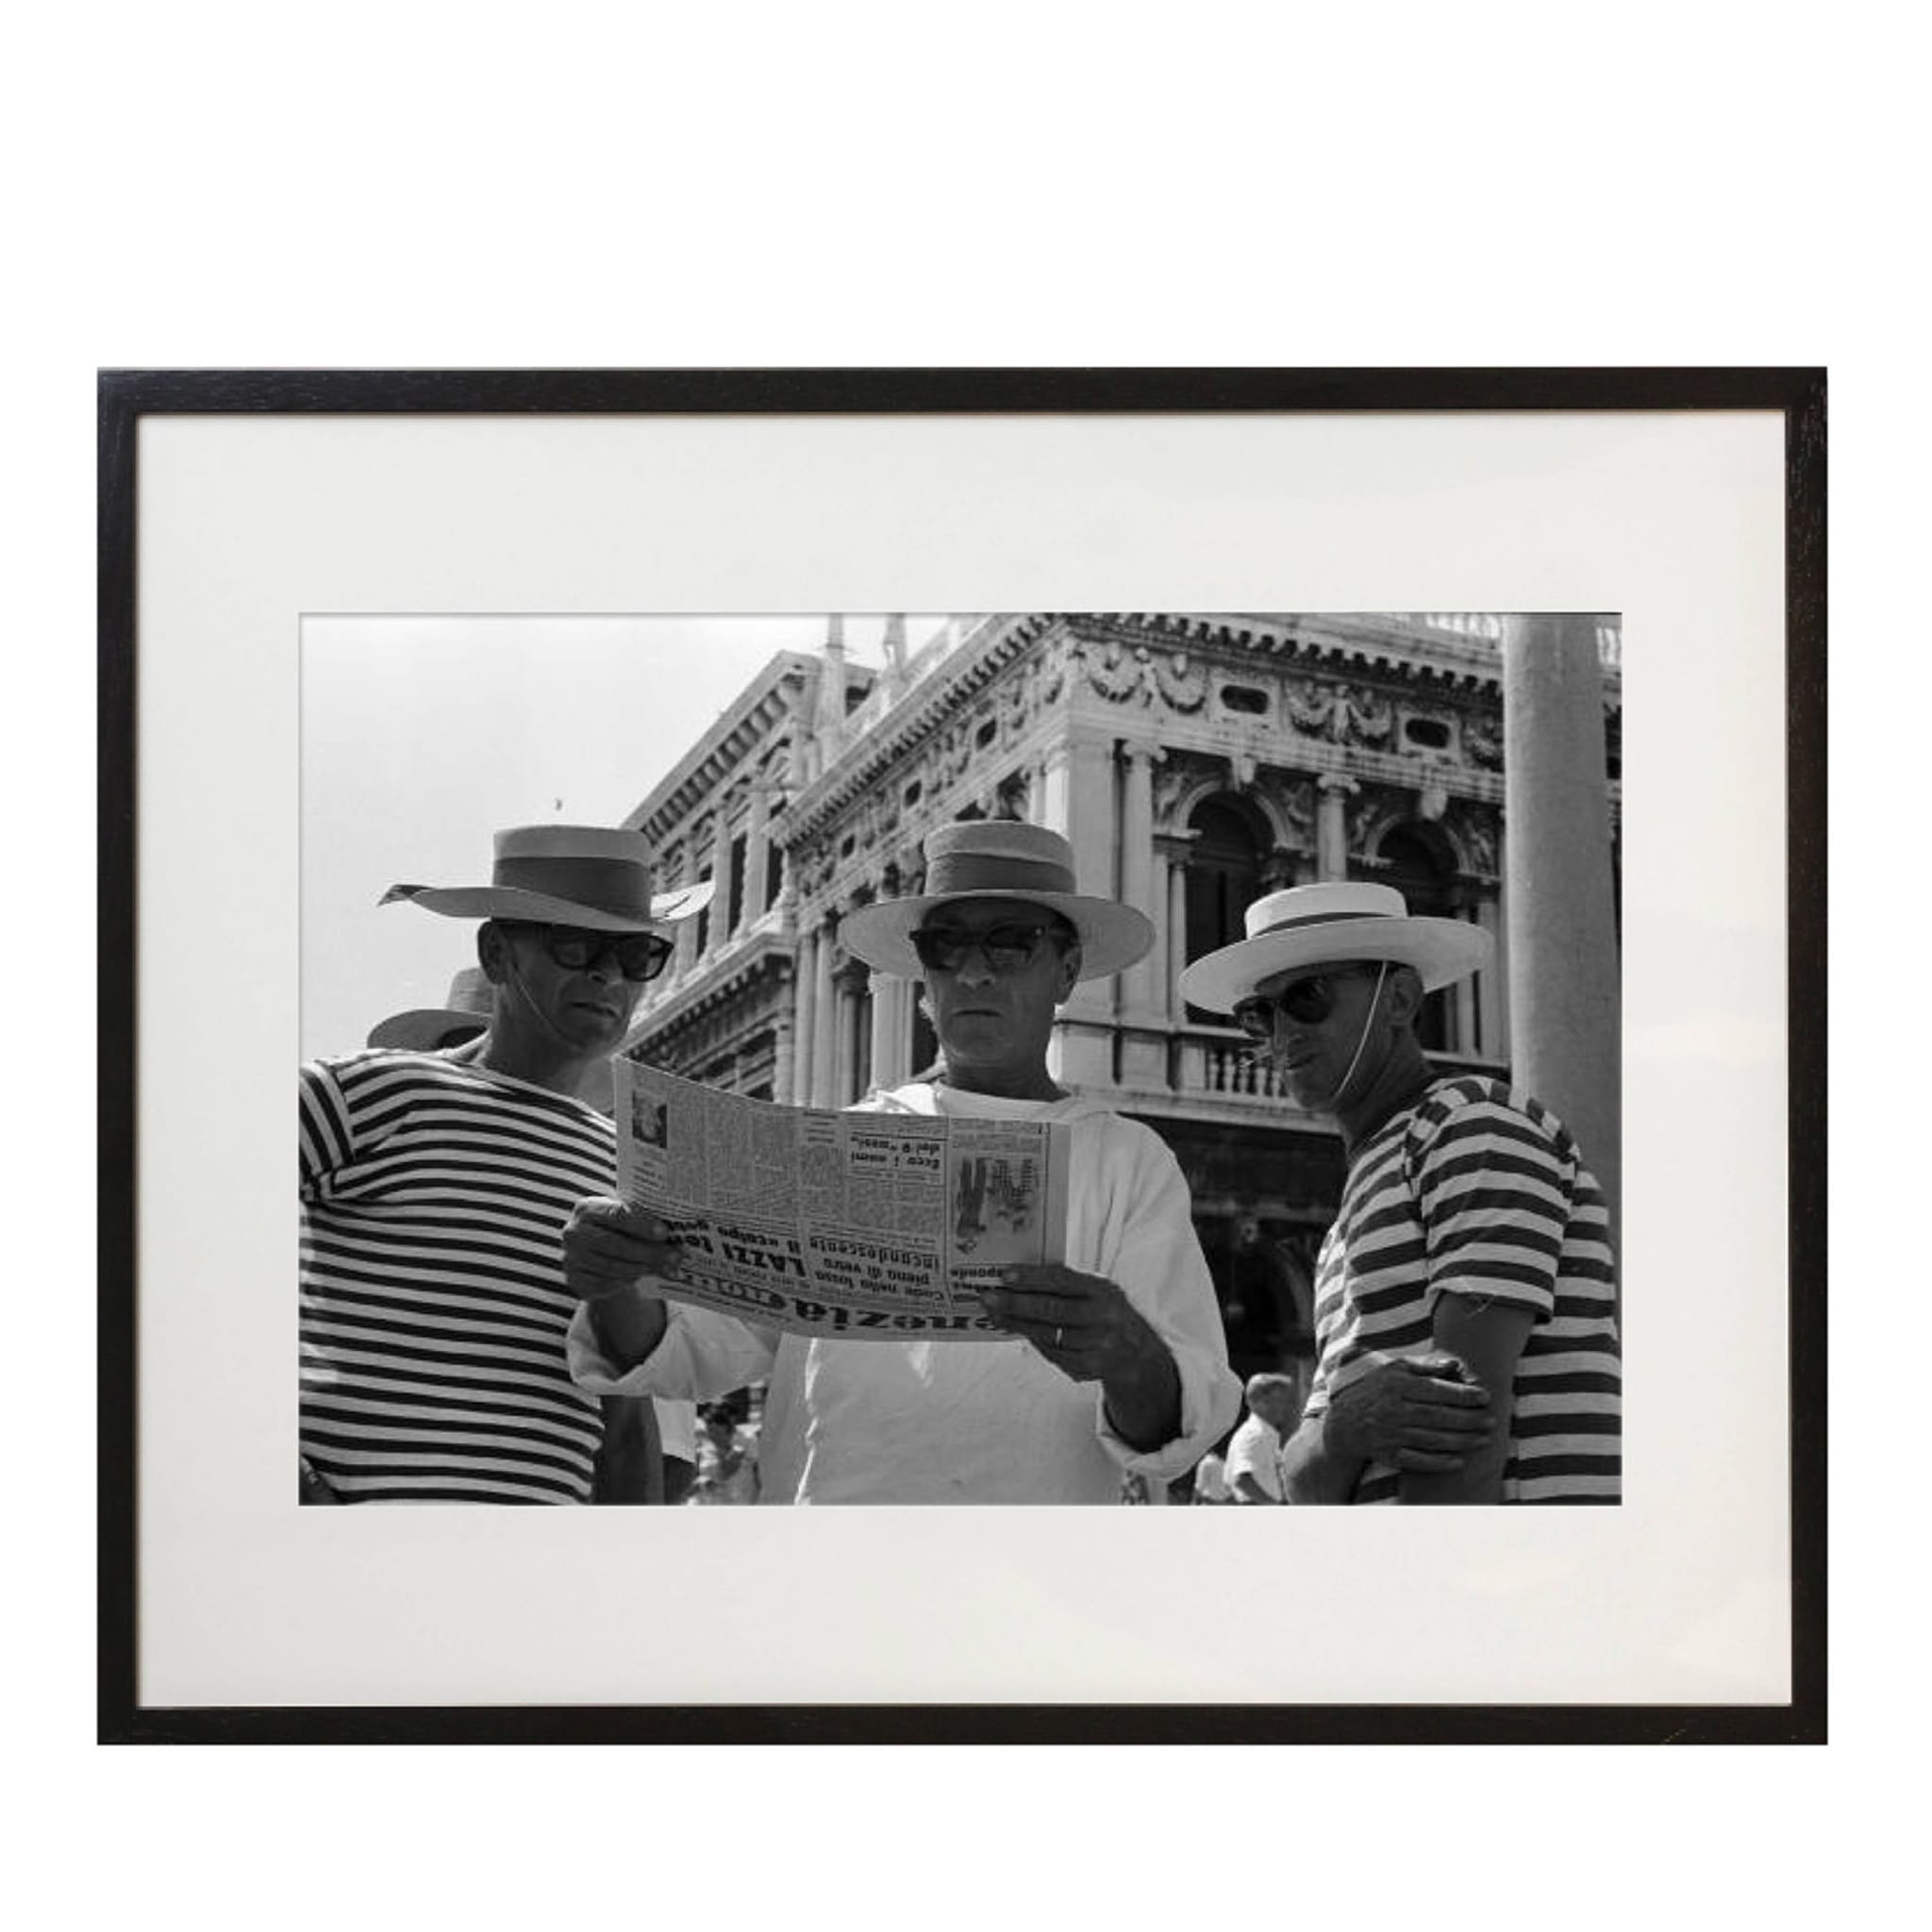 Gondolier #3 Framed Print by Nocella - Main view